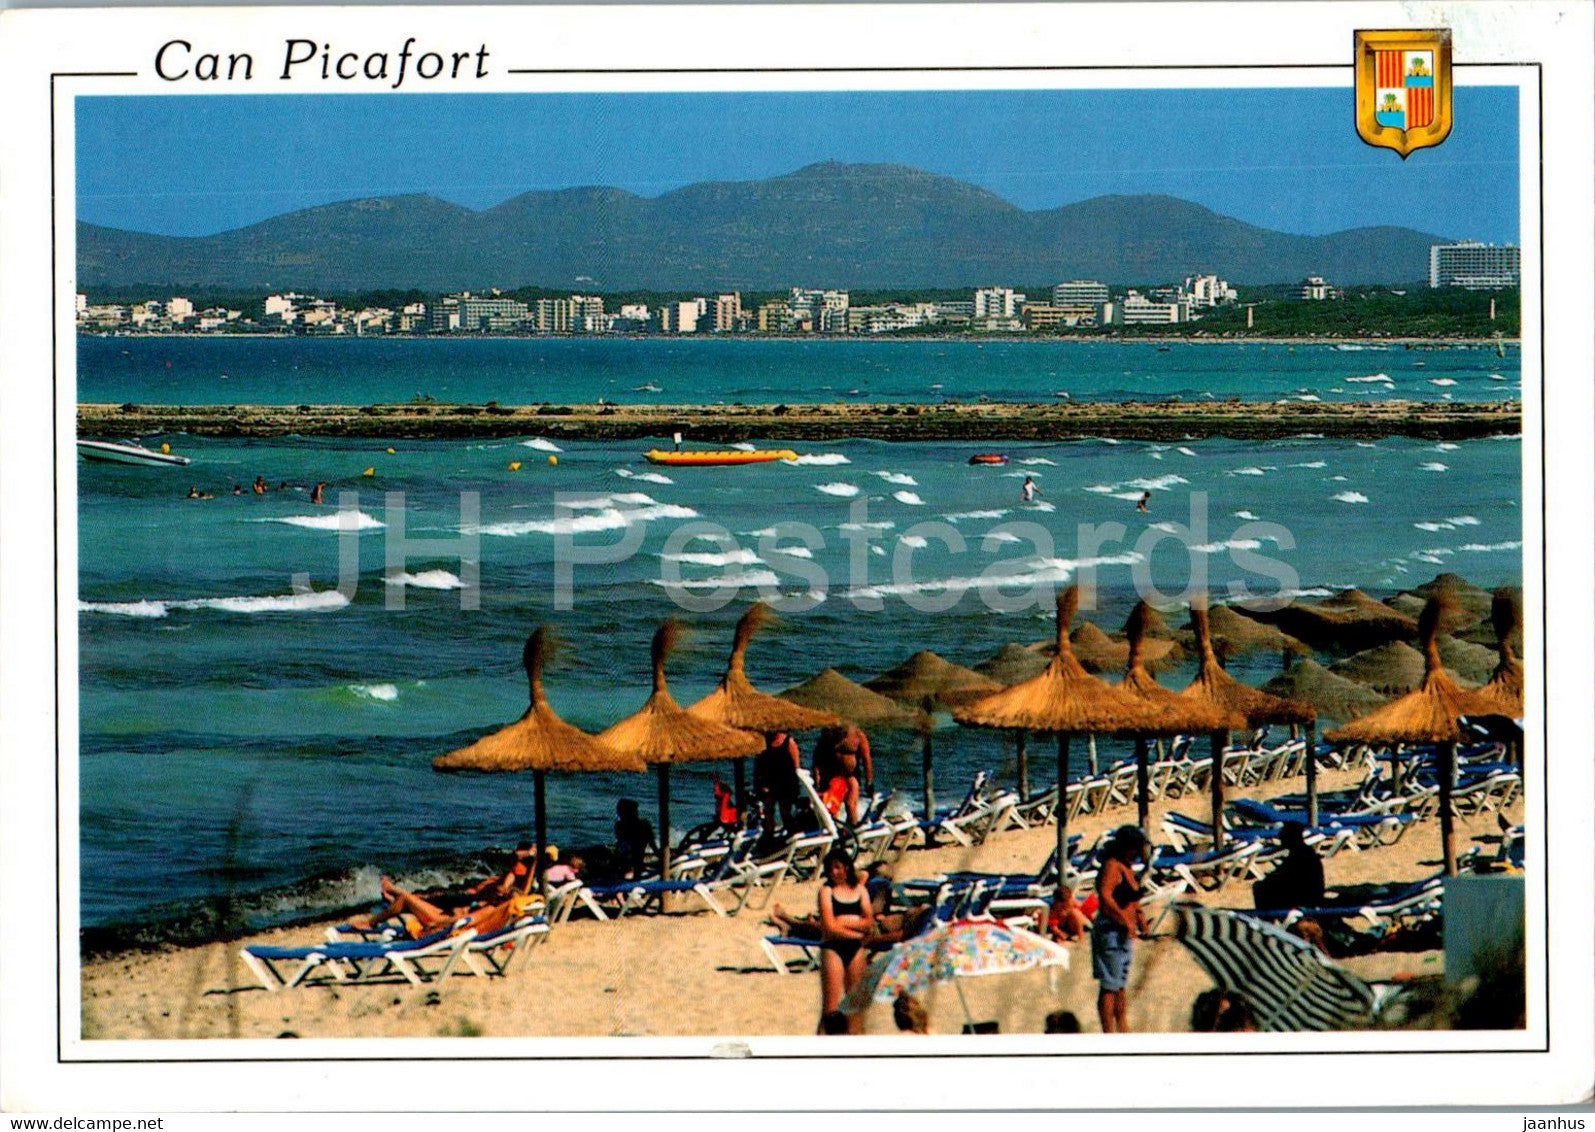 Can Picafort - Mallorca - beach - Spain - used - JH Postcards